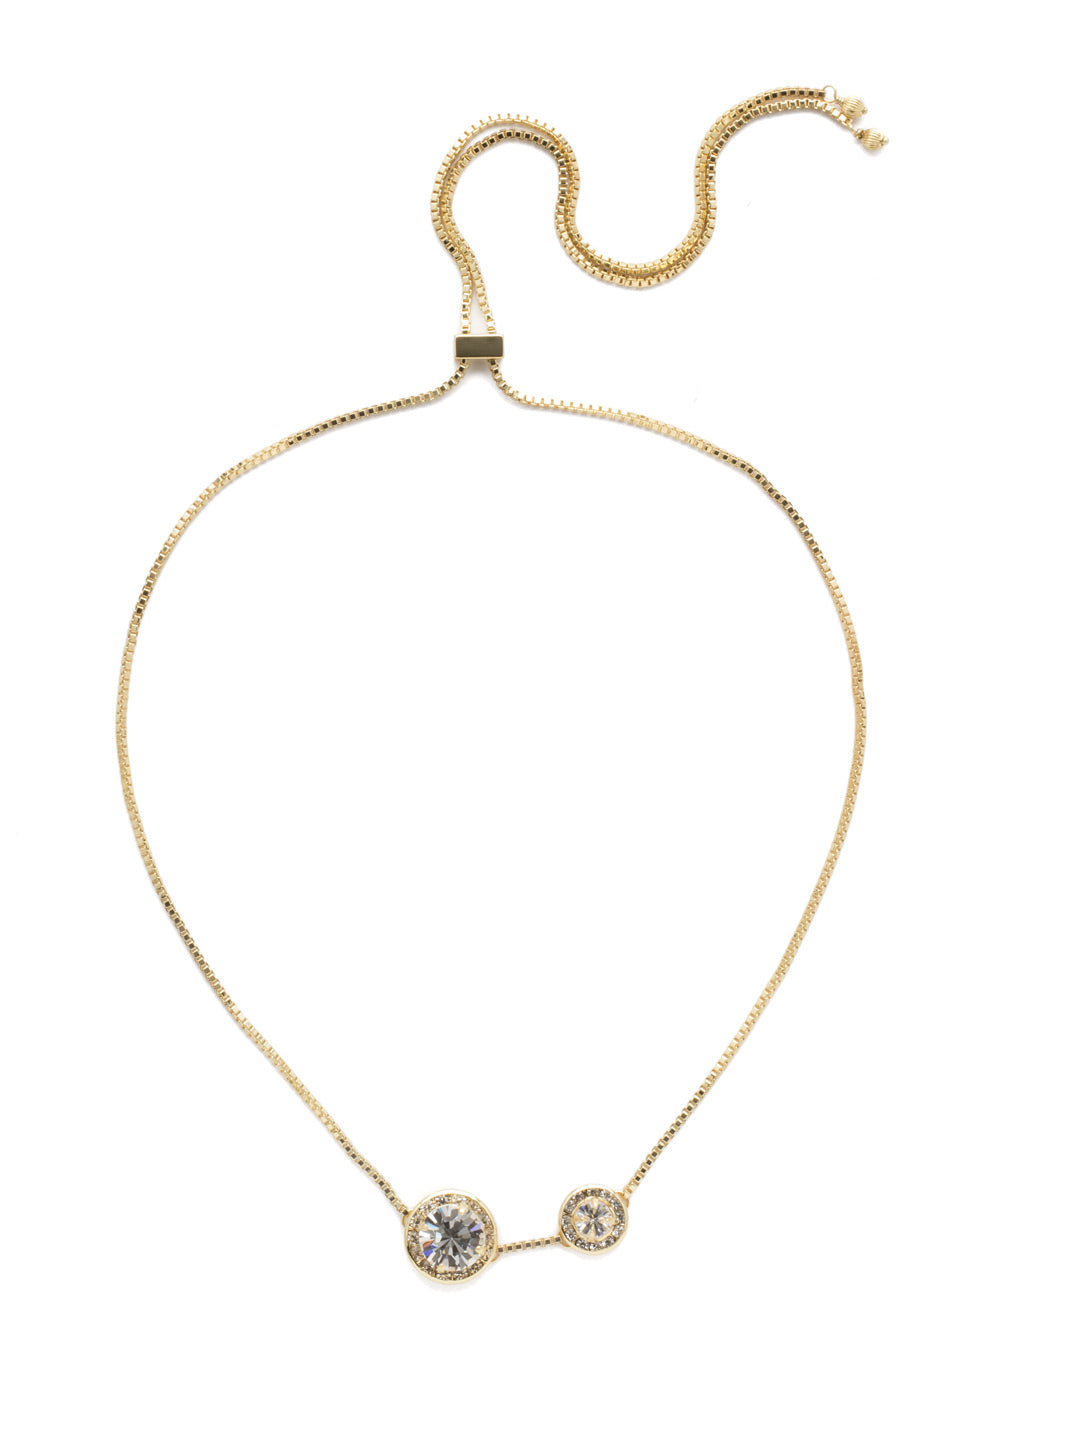 Dua Adjustable Pendant Necklace - NEB25BGCRY - <p>Two brilliant crystals bordered by smaller round crystals make up this simplistic yet glamorous choker, which can be adjusted to fit all sizes. Layer this necklace with others of varying lengths and shapes. From Sorrelli's Crystal collection in our Bright Gold-tone finish.</p>